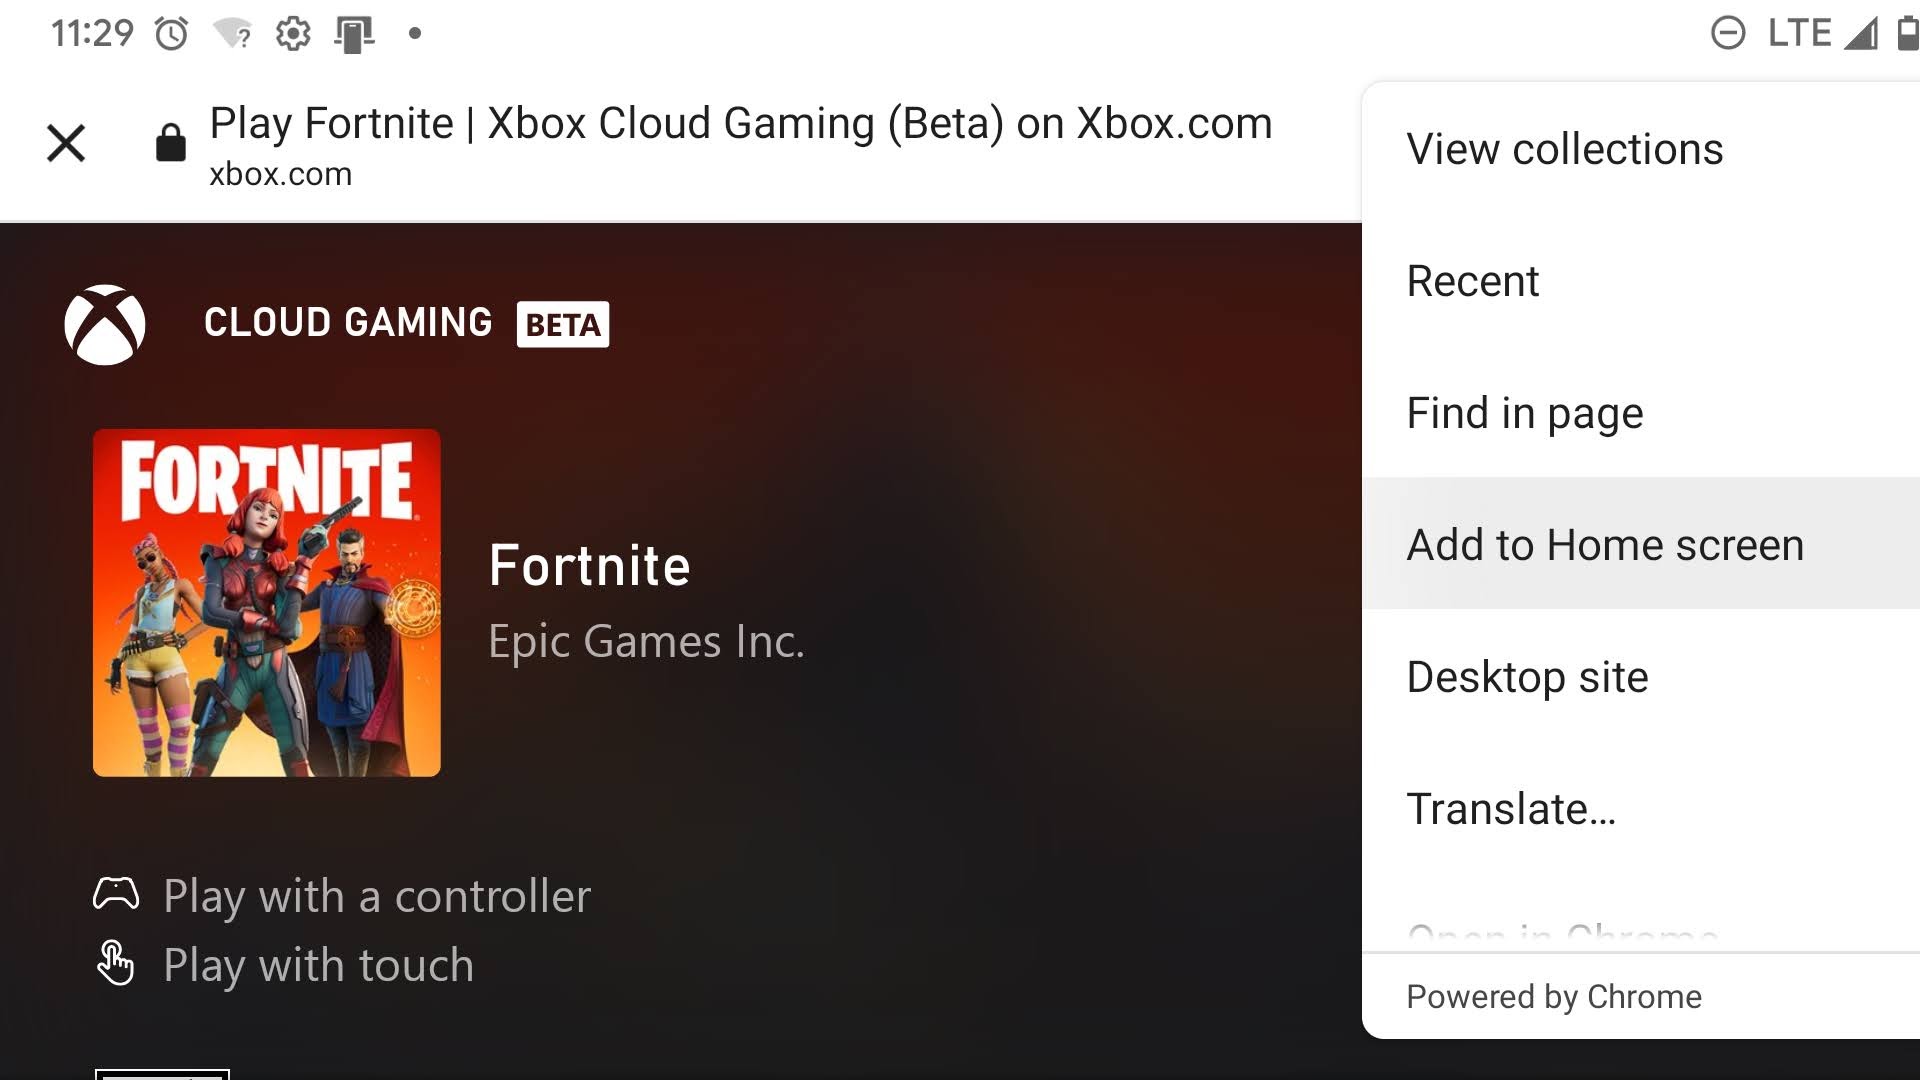 Adding Fortnite and Xbox Cloud gaming to home screen